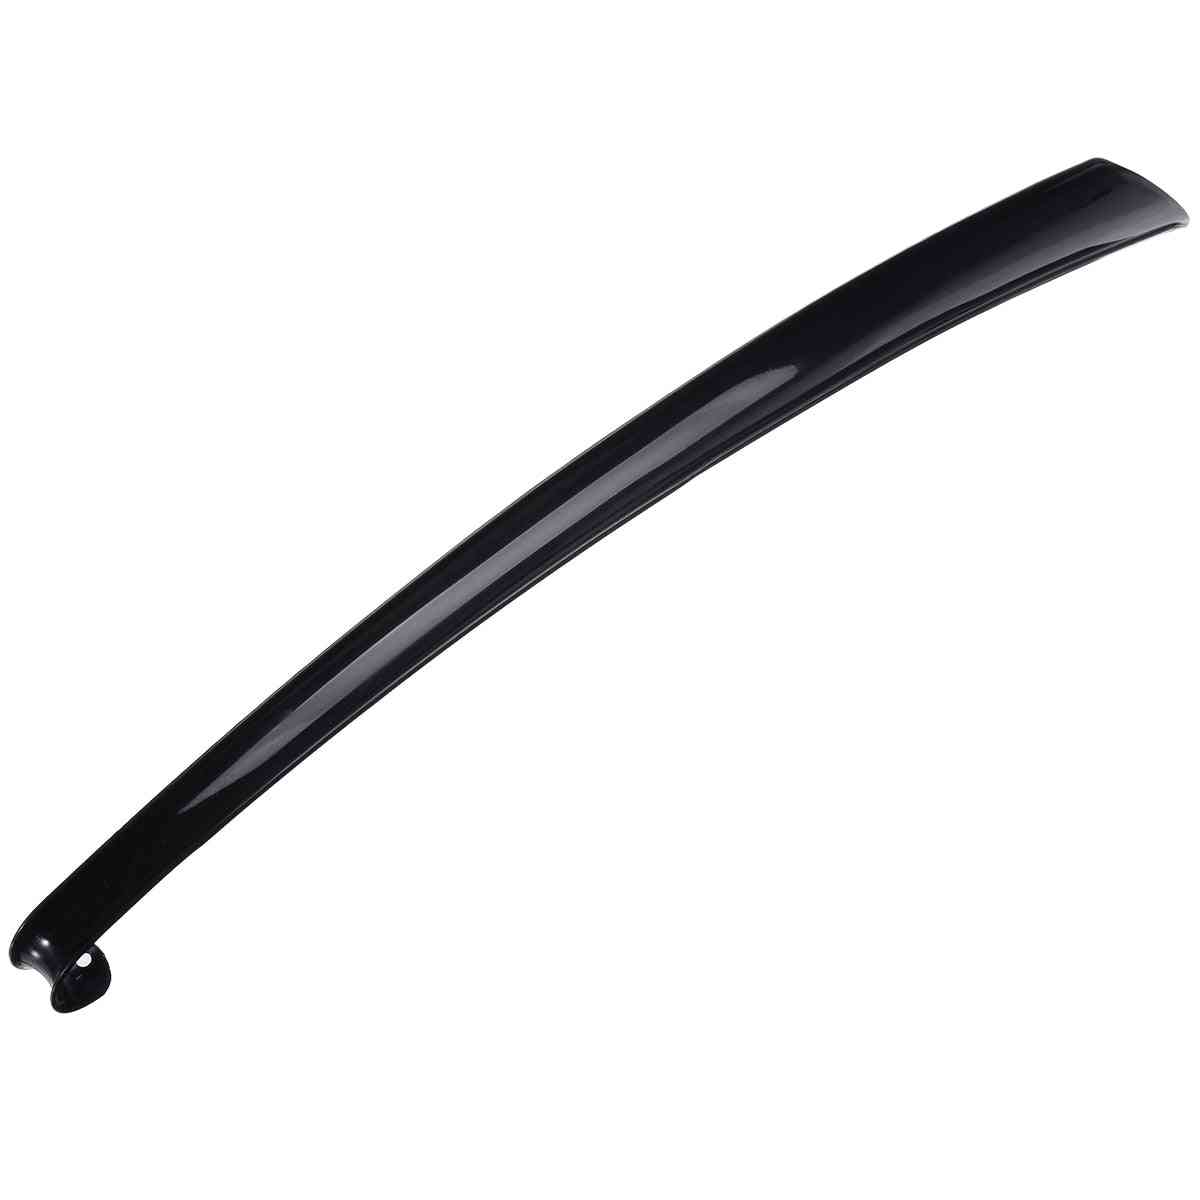 Extra Long Flexible Shoehorn, Shoe Pull Lifter Remover - Disability Mobility Aid Flexible Stick